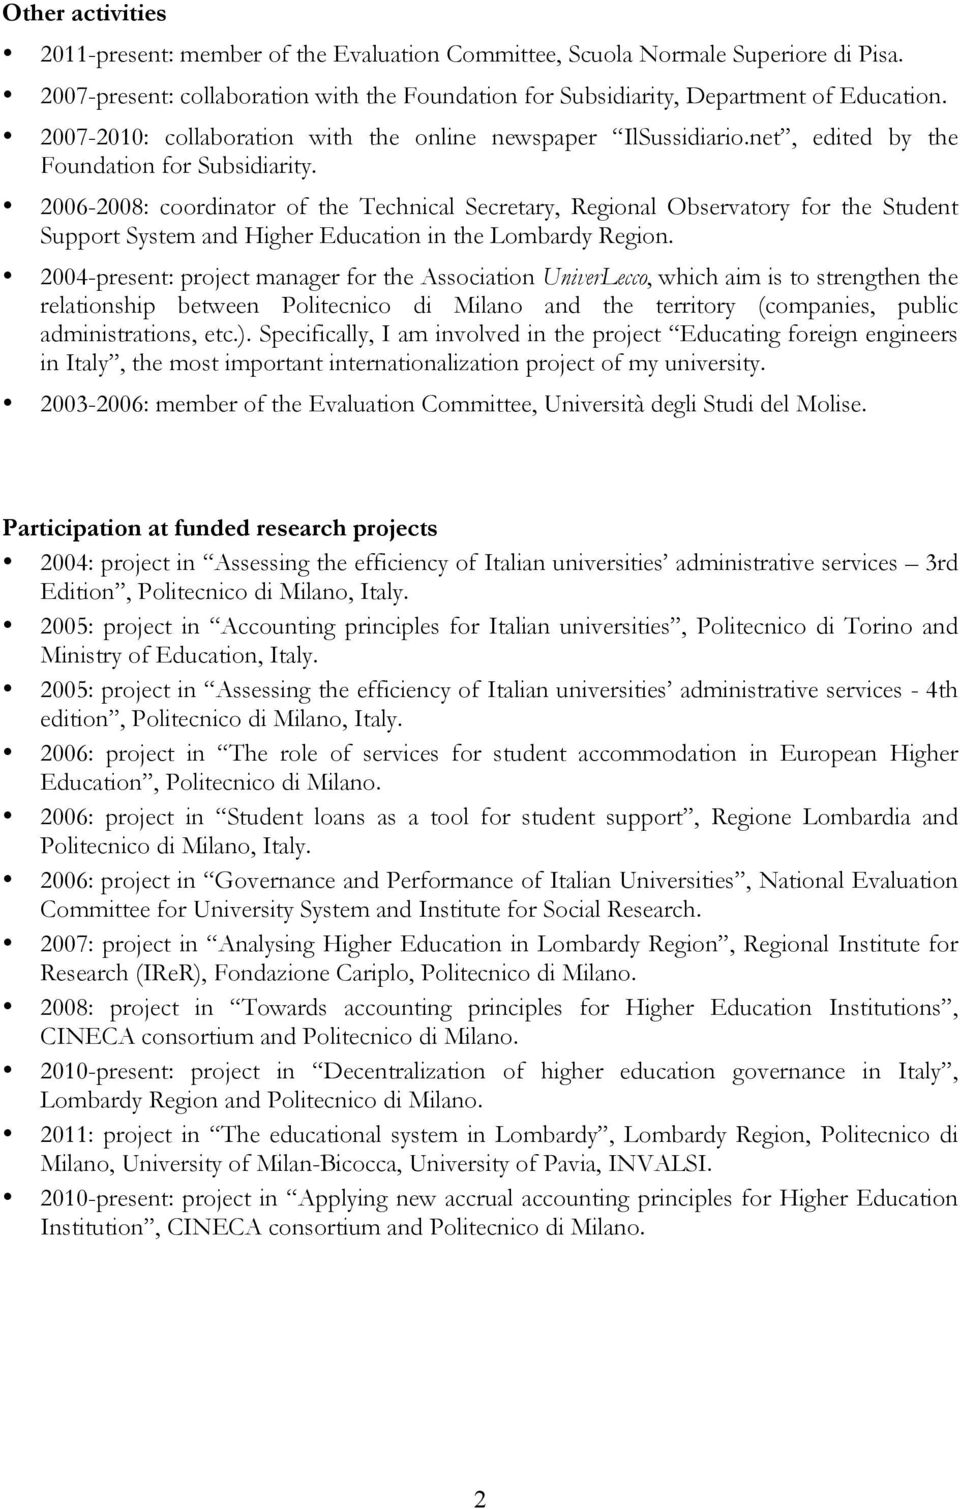 2006-2008: coordinator of the Technical Secretary, Regional Observatory for the Student Support System and Higher Education in the Lombardy Region.